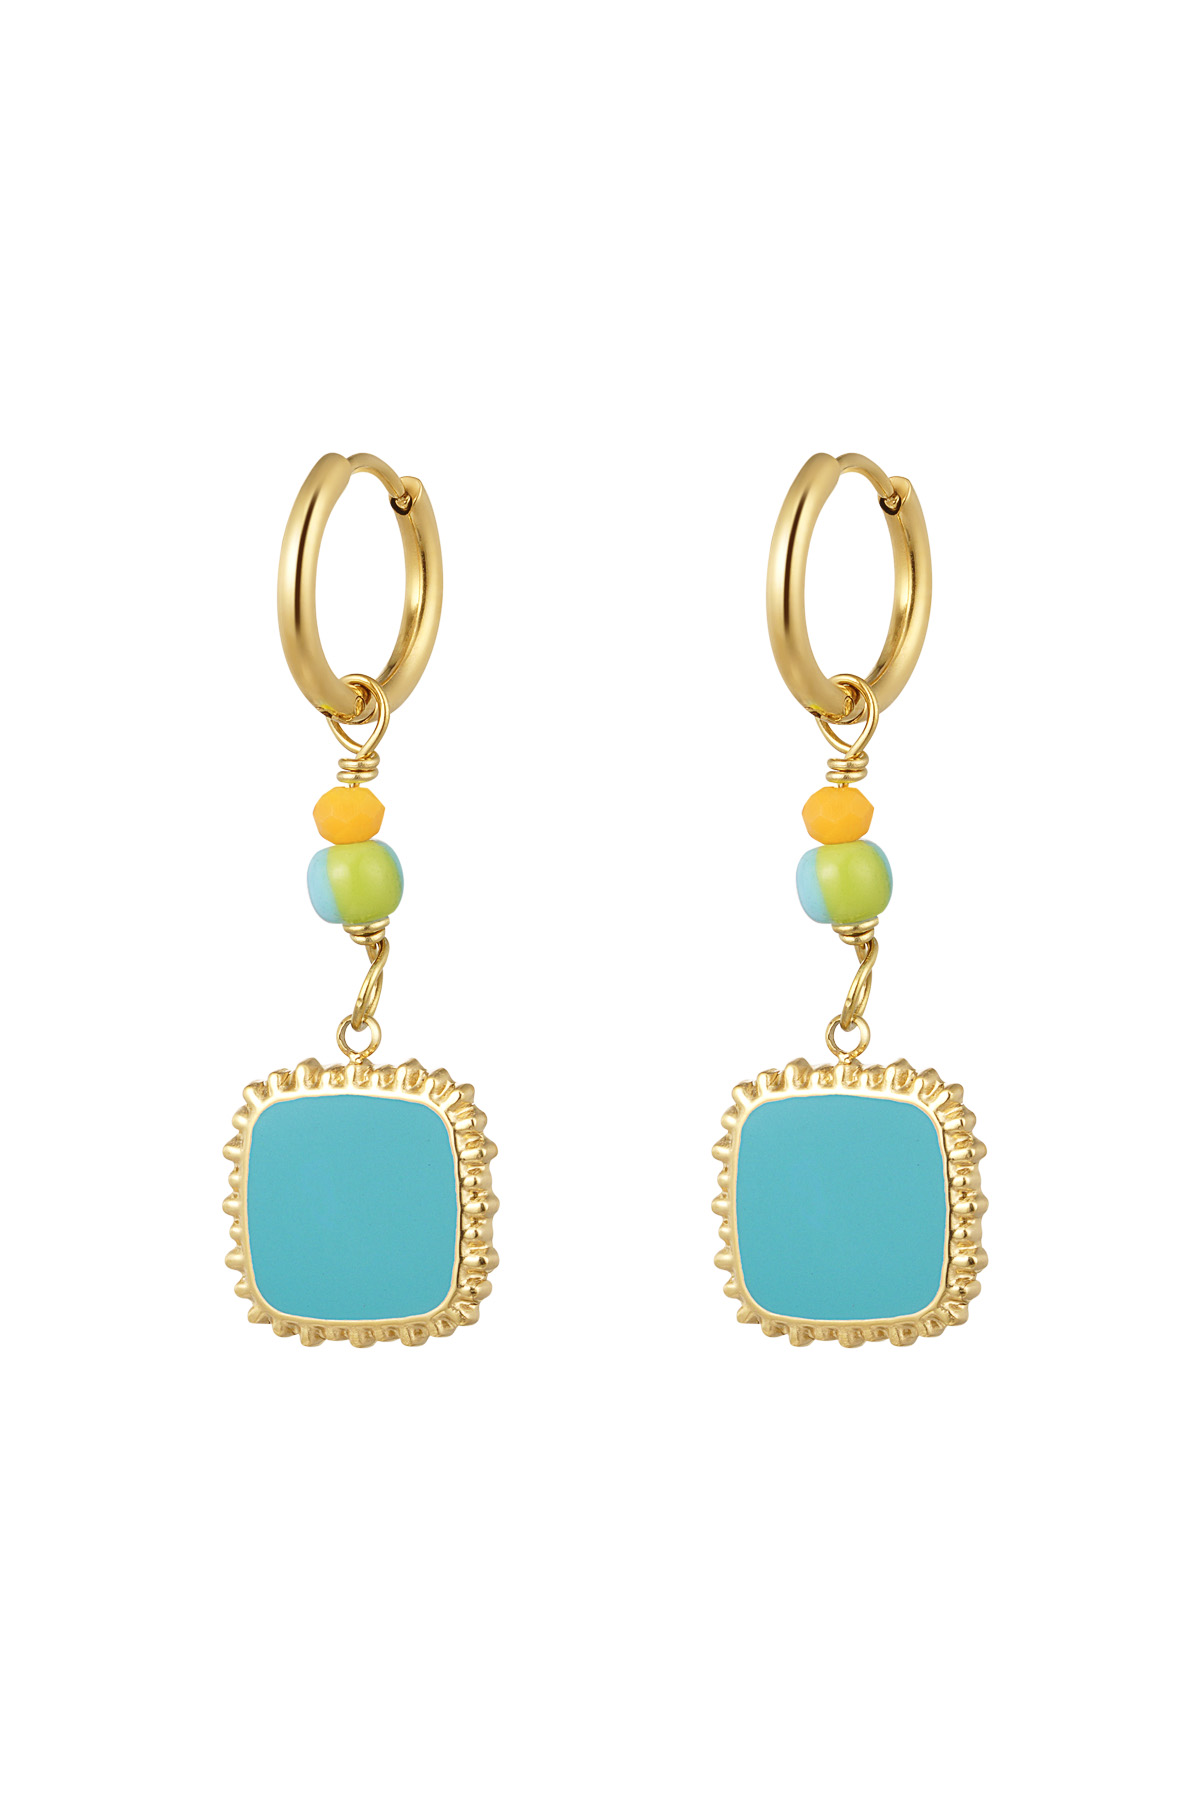 Earrings with beads and square pendant blue - gold